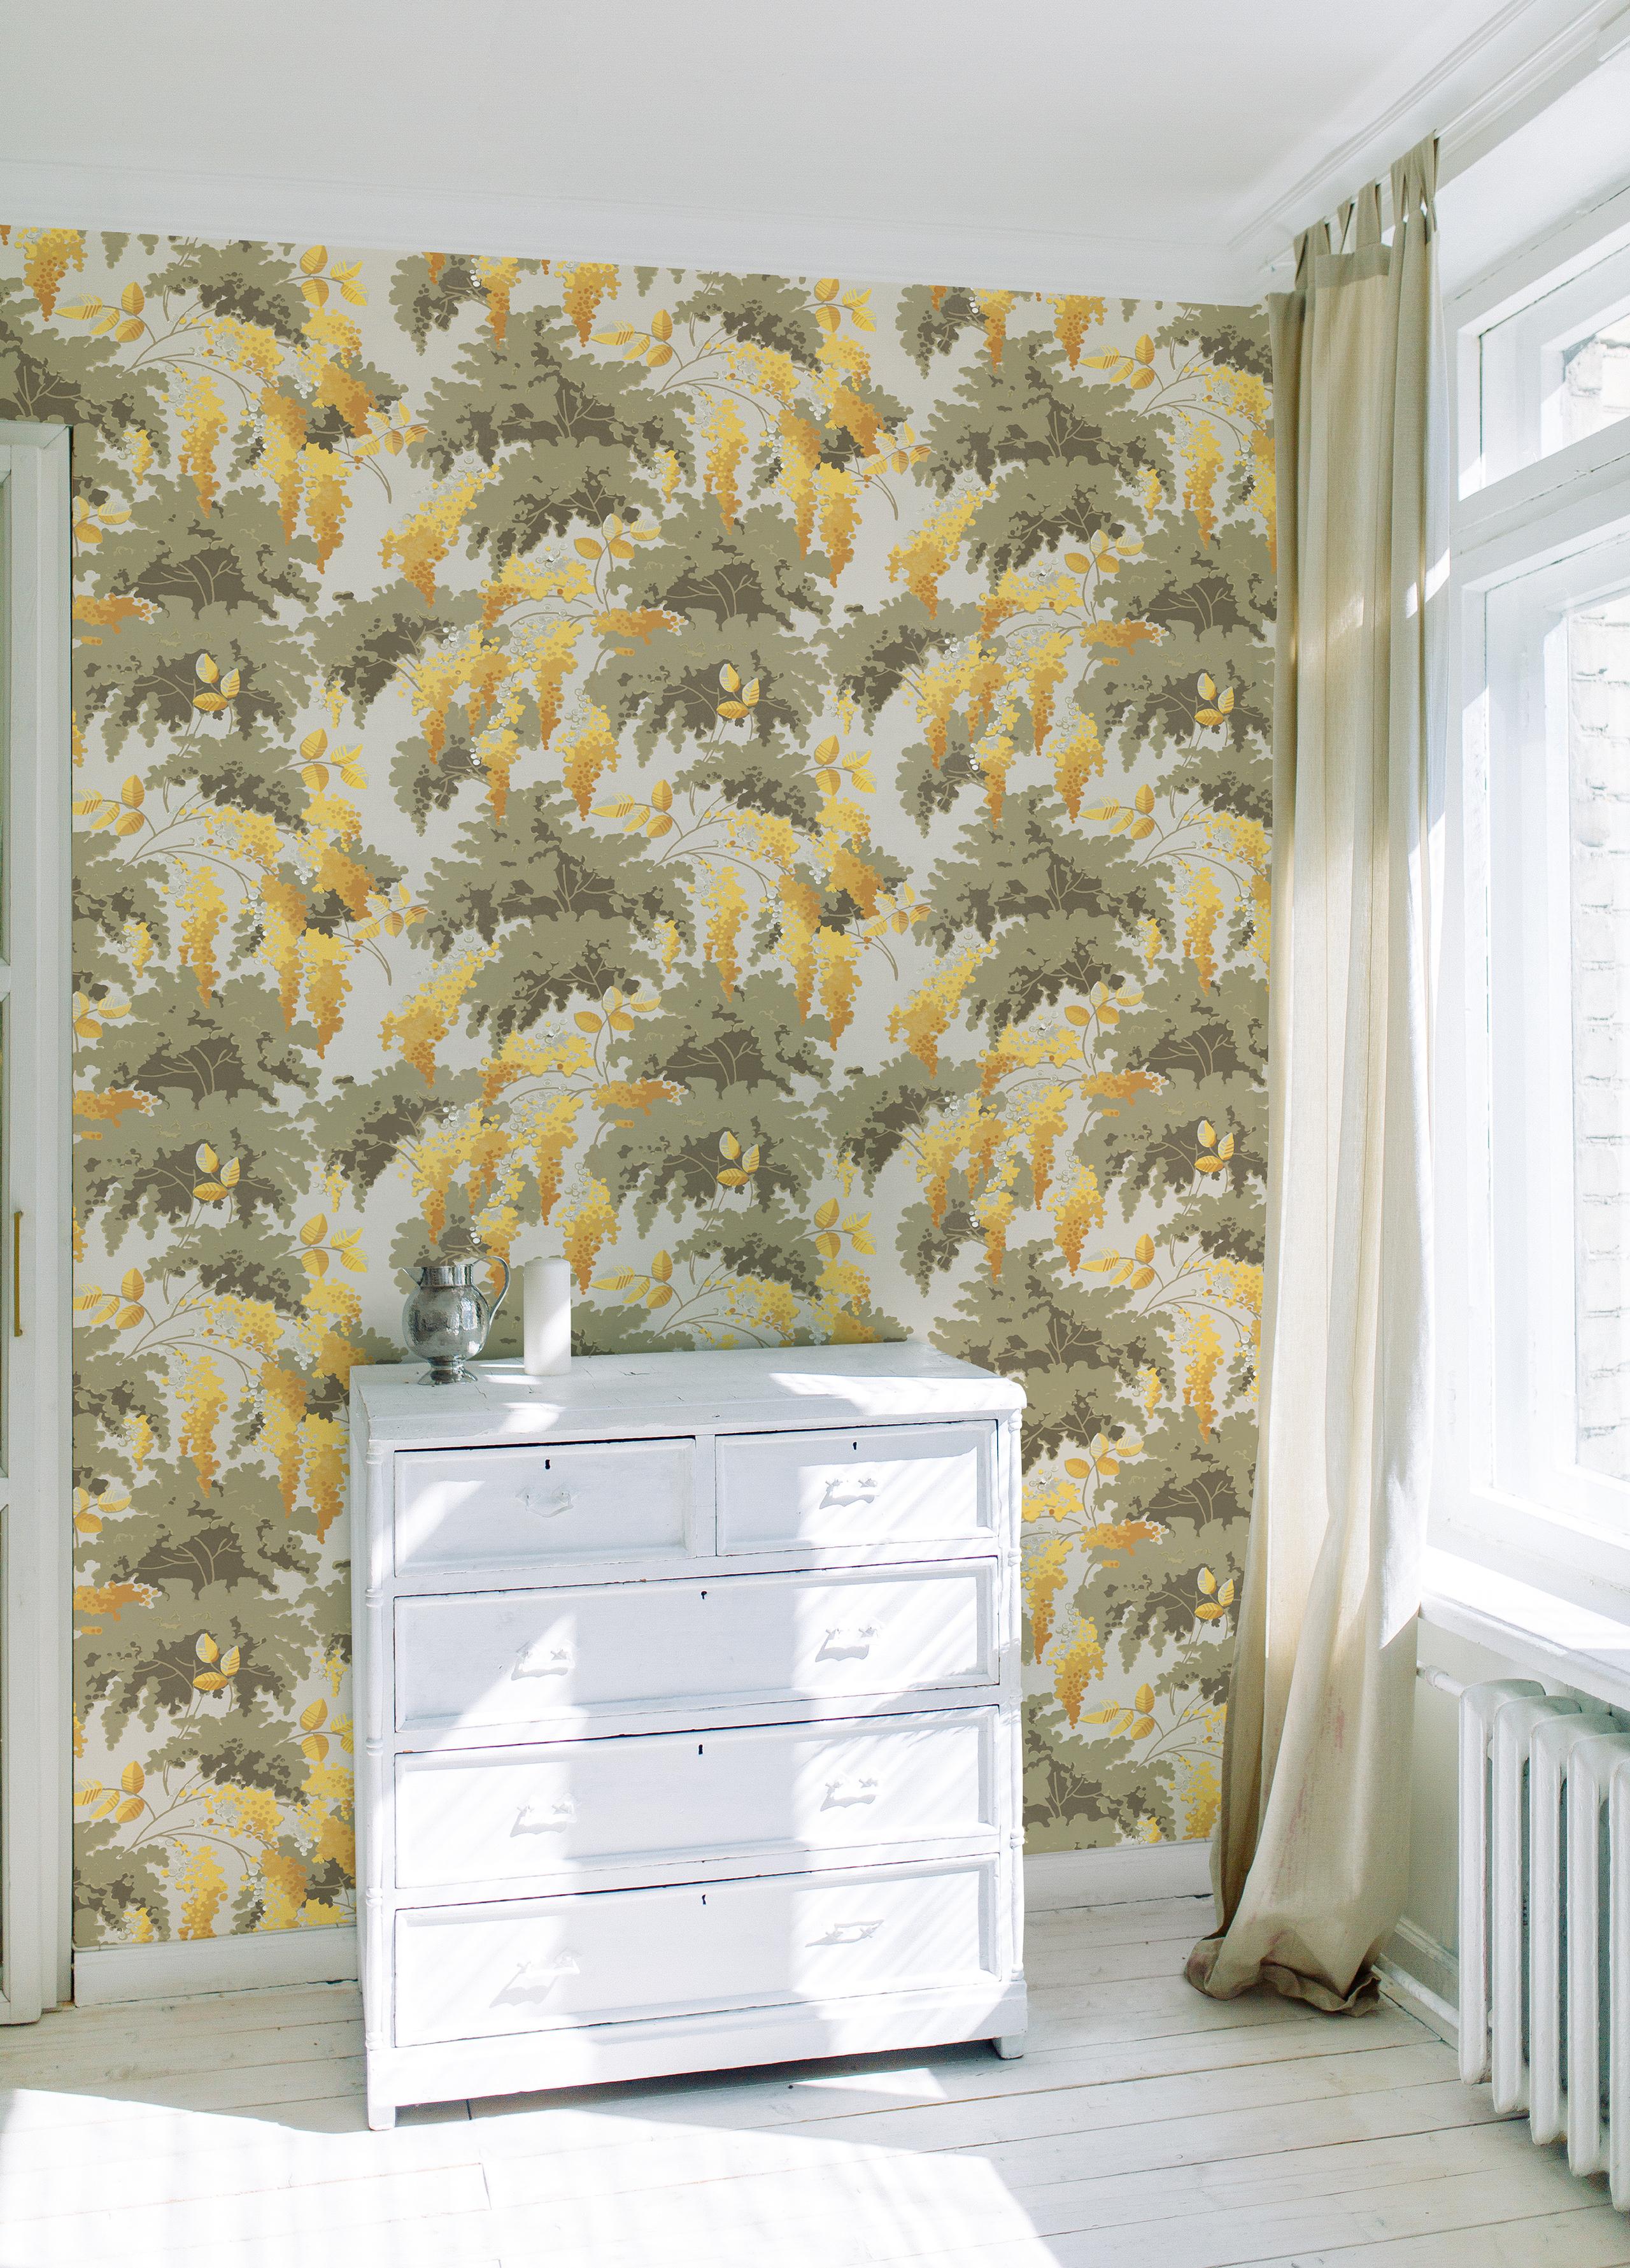 This spectacular plant wallpaper is inspired by an original Isidore Leroy design from the 1930s.
The play of light and shadow in the leaves contrasts with the colourful touches of the large flowers. This decoration also highlights the symmetry of a